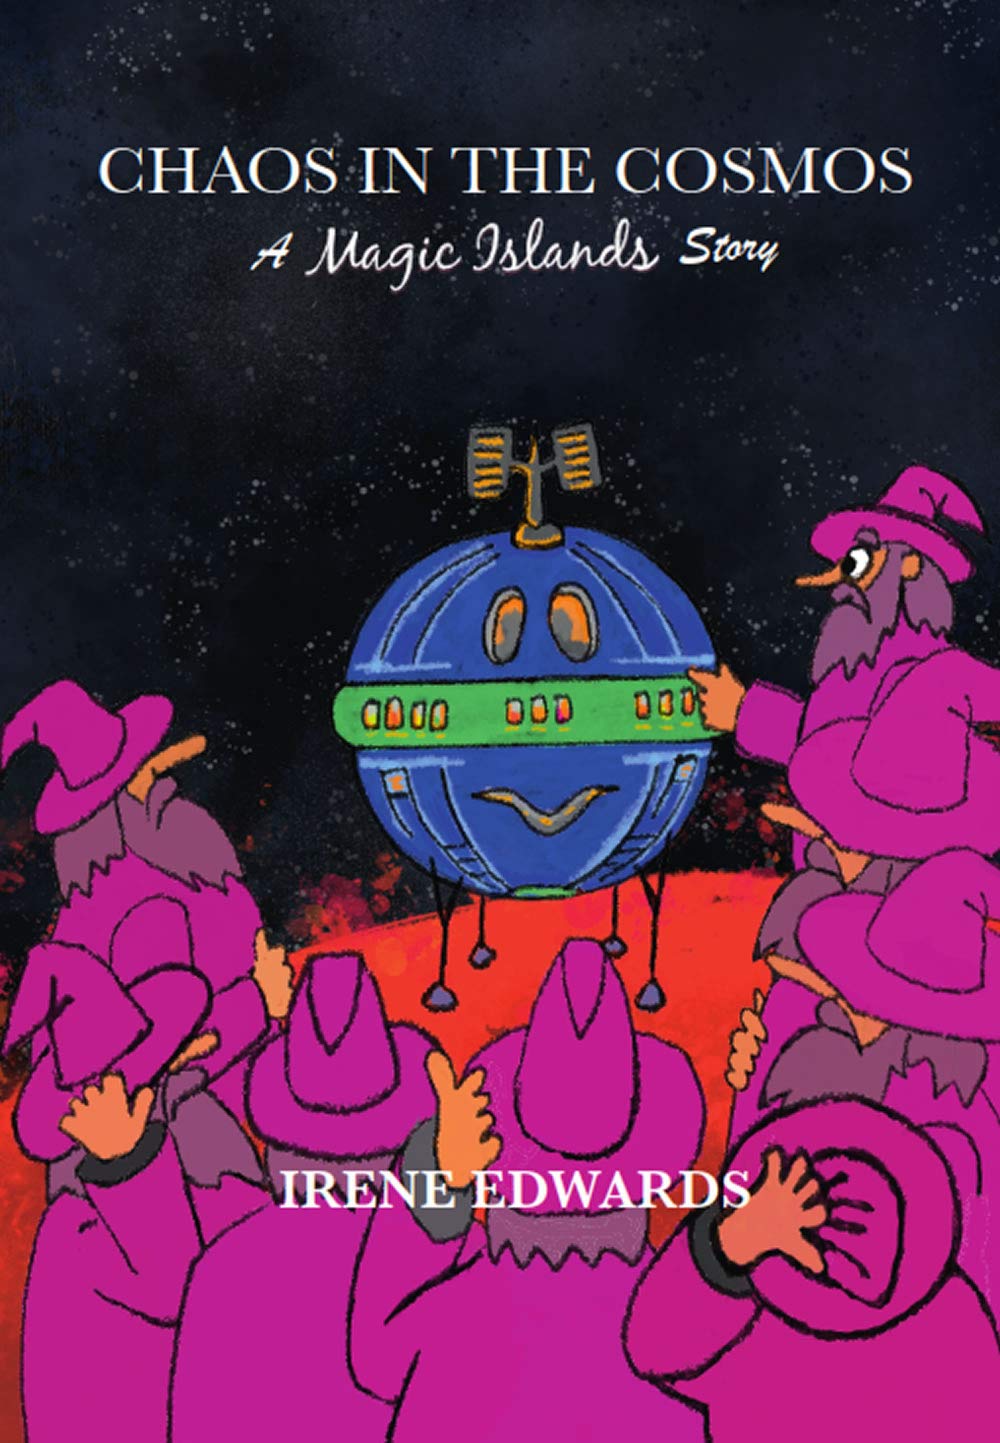 Chaos in the Cosmos by Irene Edwards